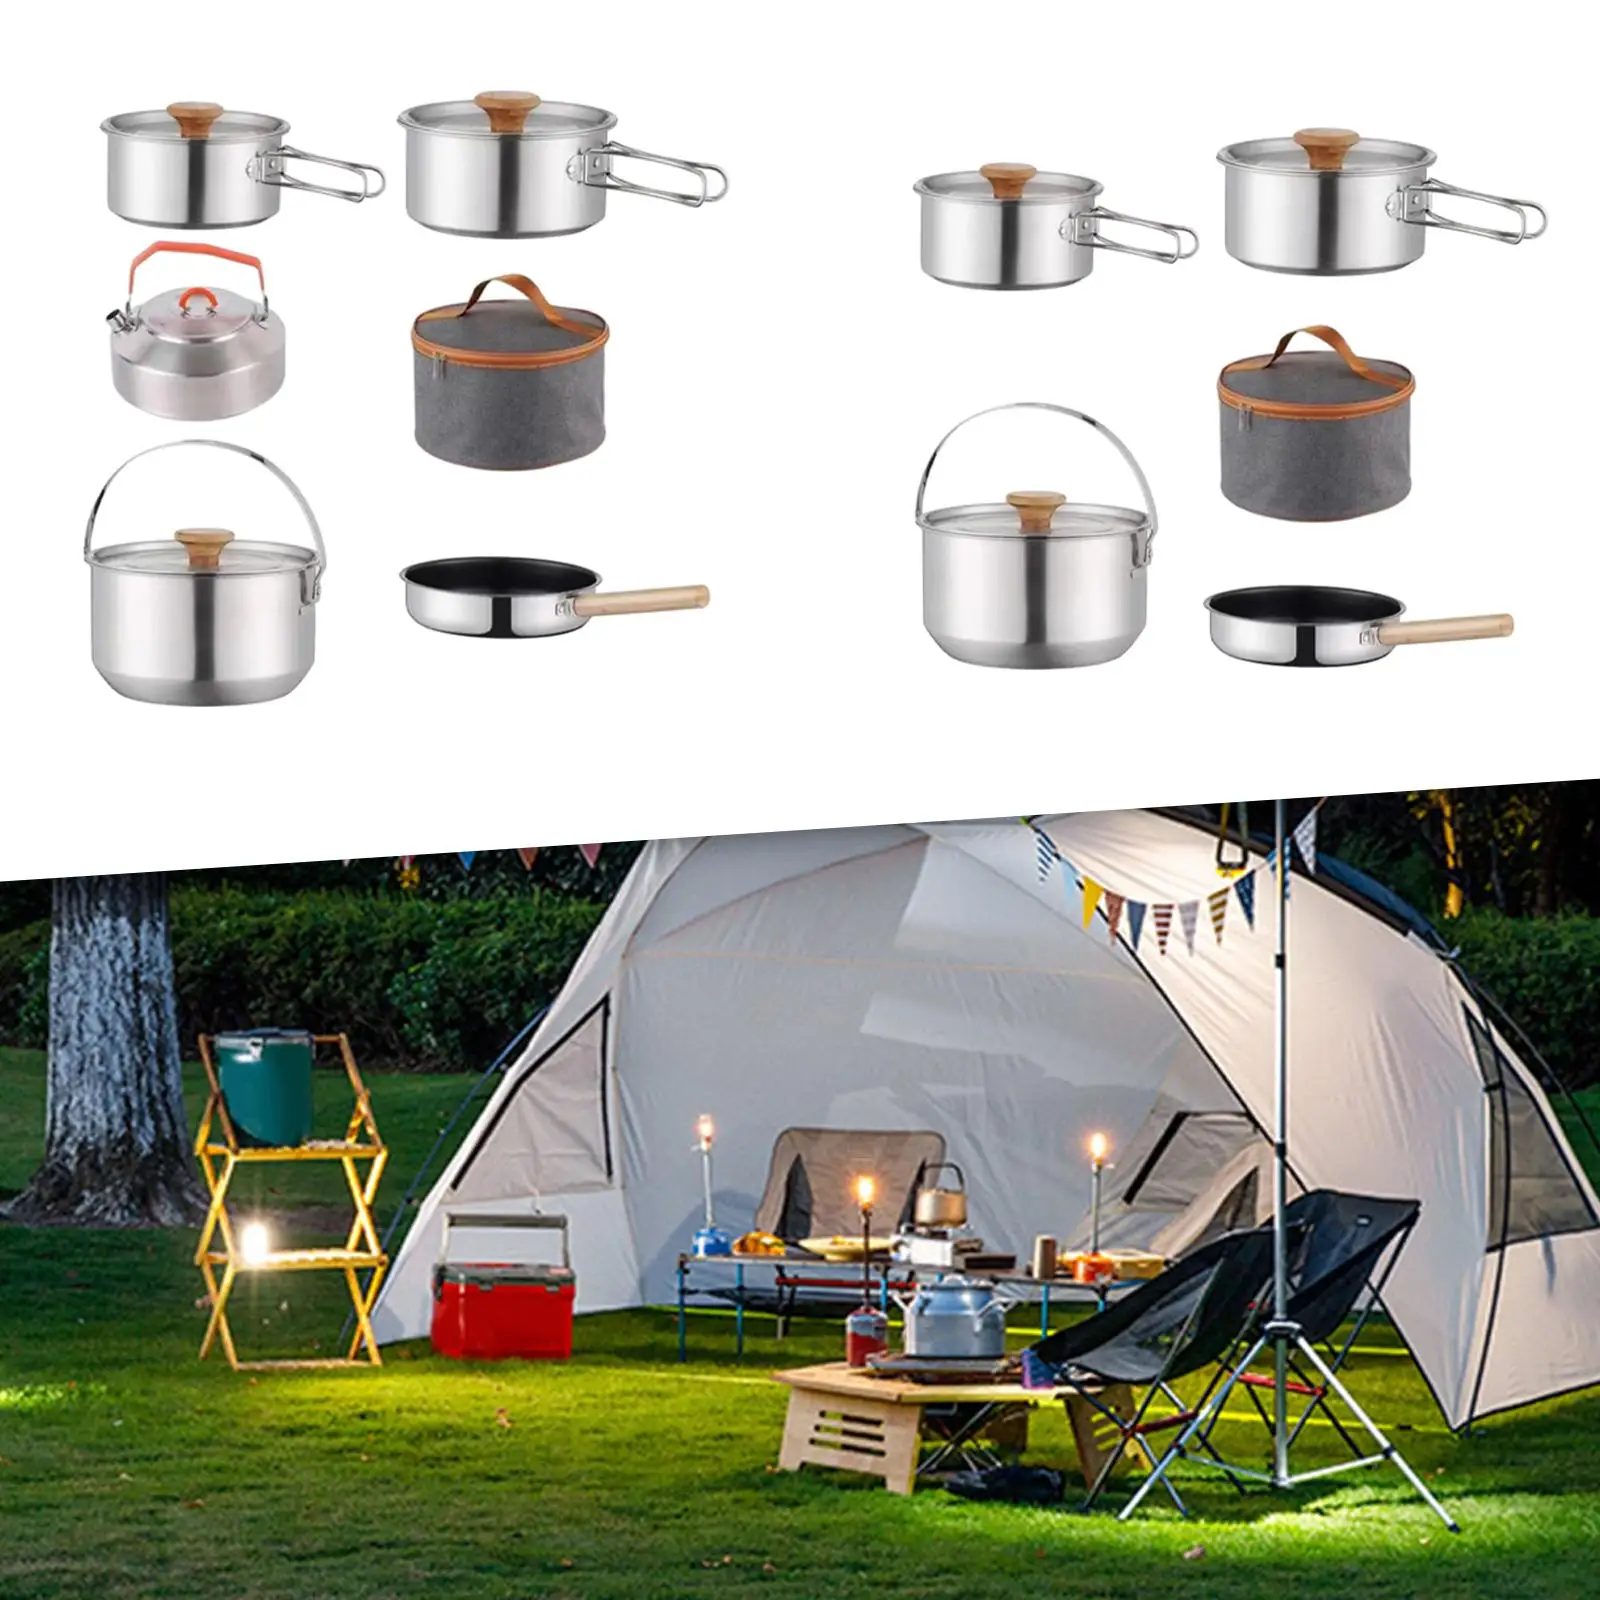 Camping Cookware Kit Outdoor Pot with Storage Bag Portable Nonstick Cookset Cooking Set for Indoors Picnic Campfire Fishing